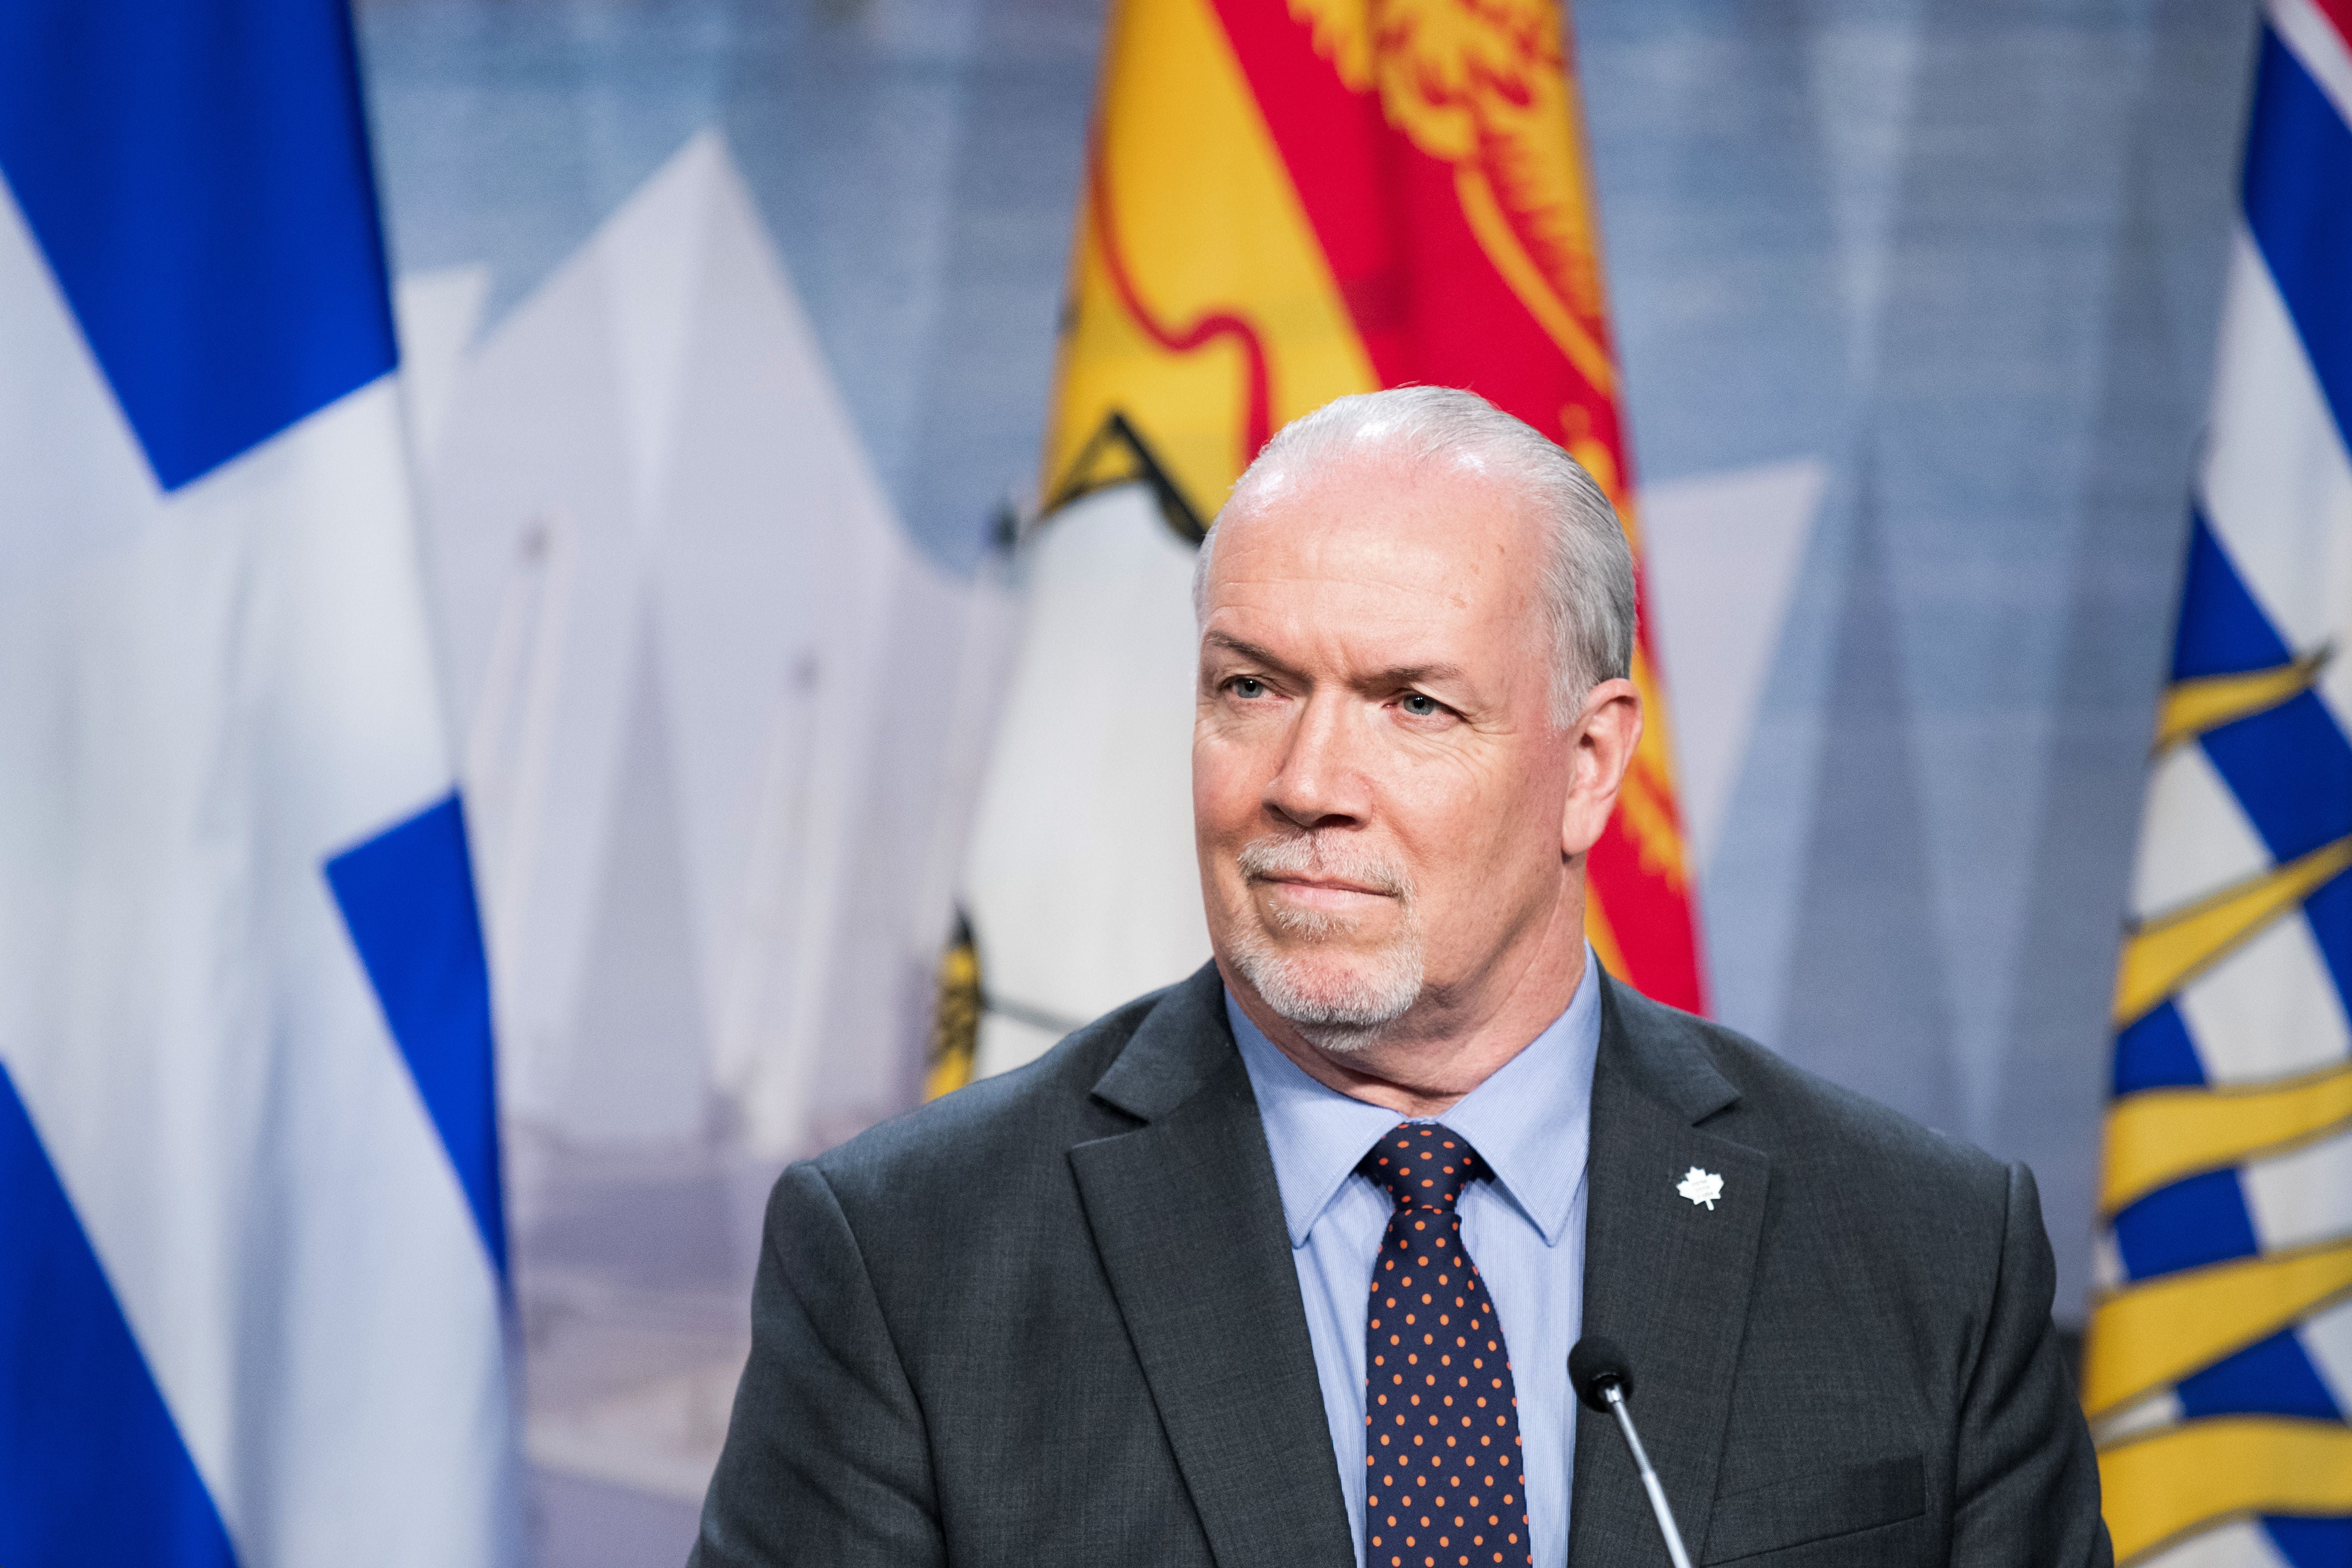 British Columbia Premier John Horgan has faced scrutiny after saying fatalities are a part of life amid a deadly heatwave.